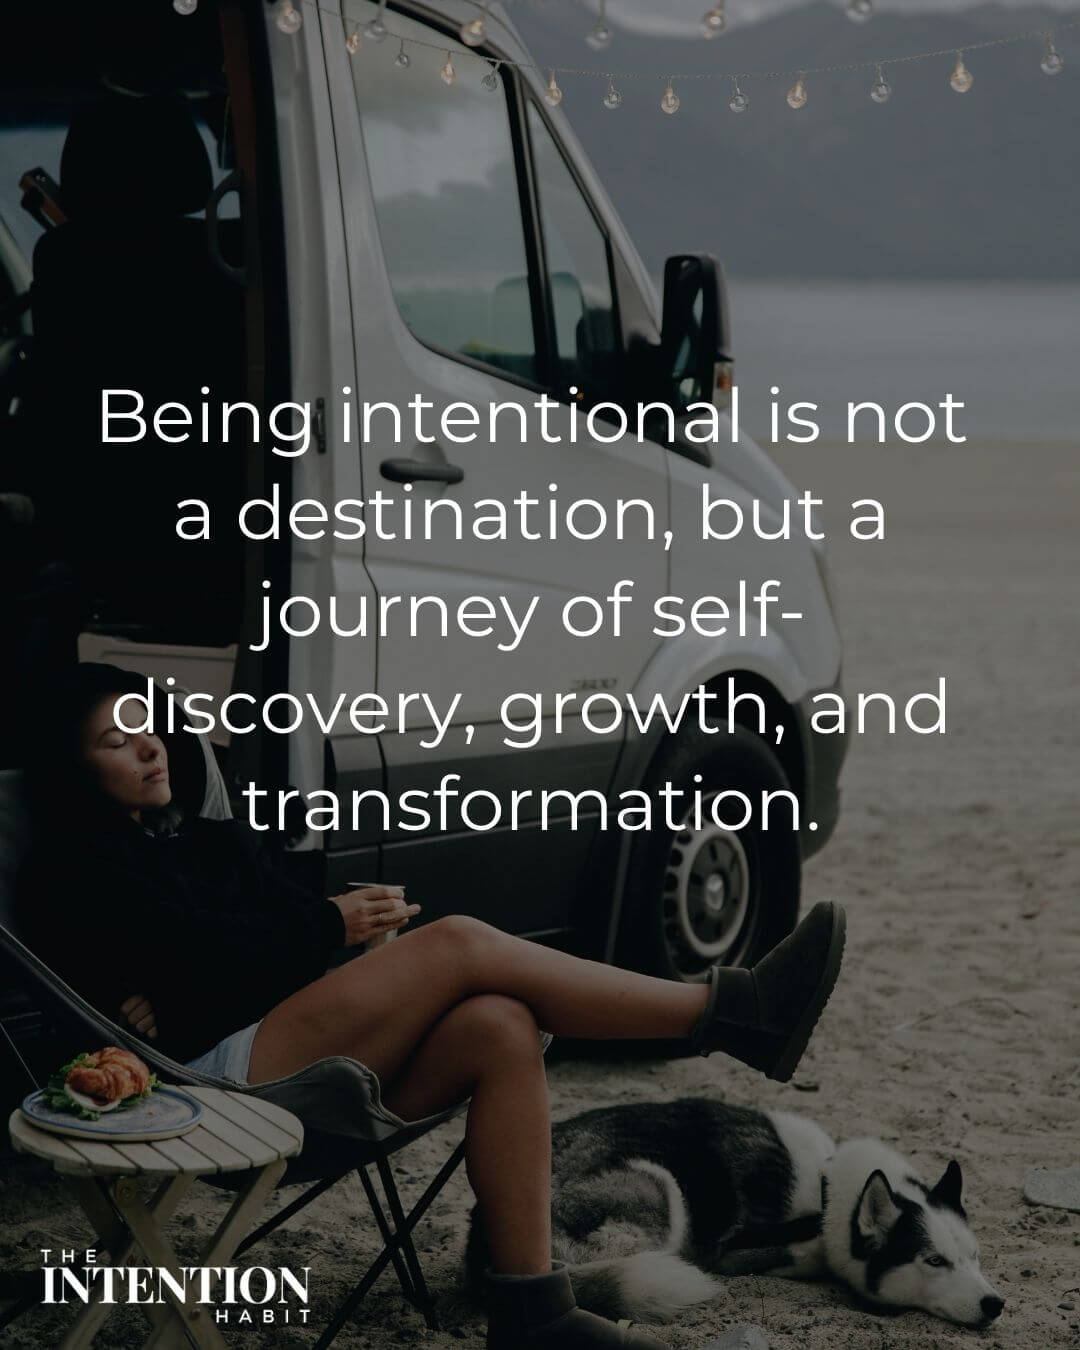 Intentional living quote being intentional is not a destination but a journey of self discovery, growth and transformation